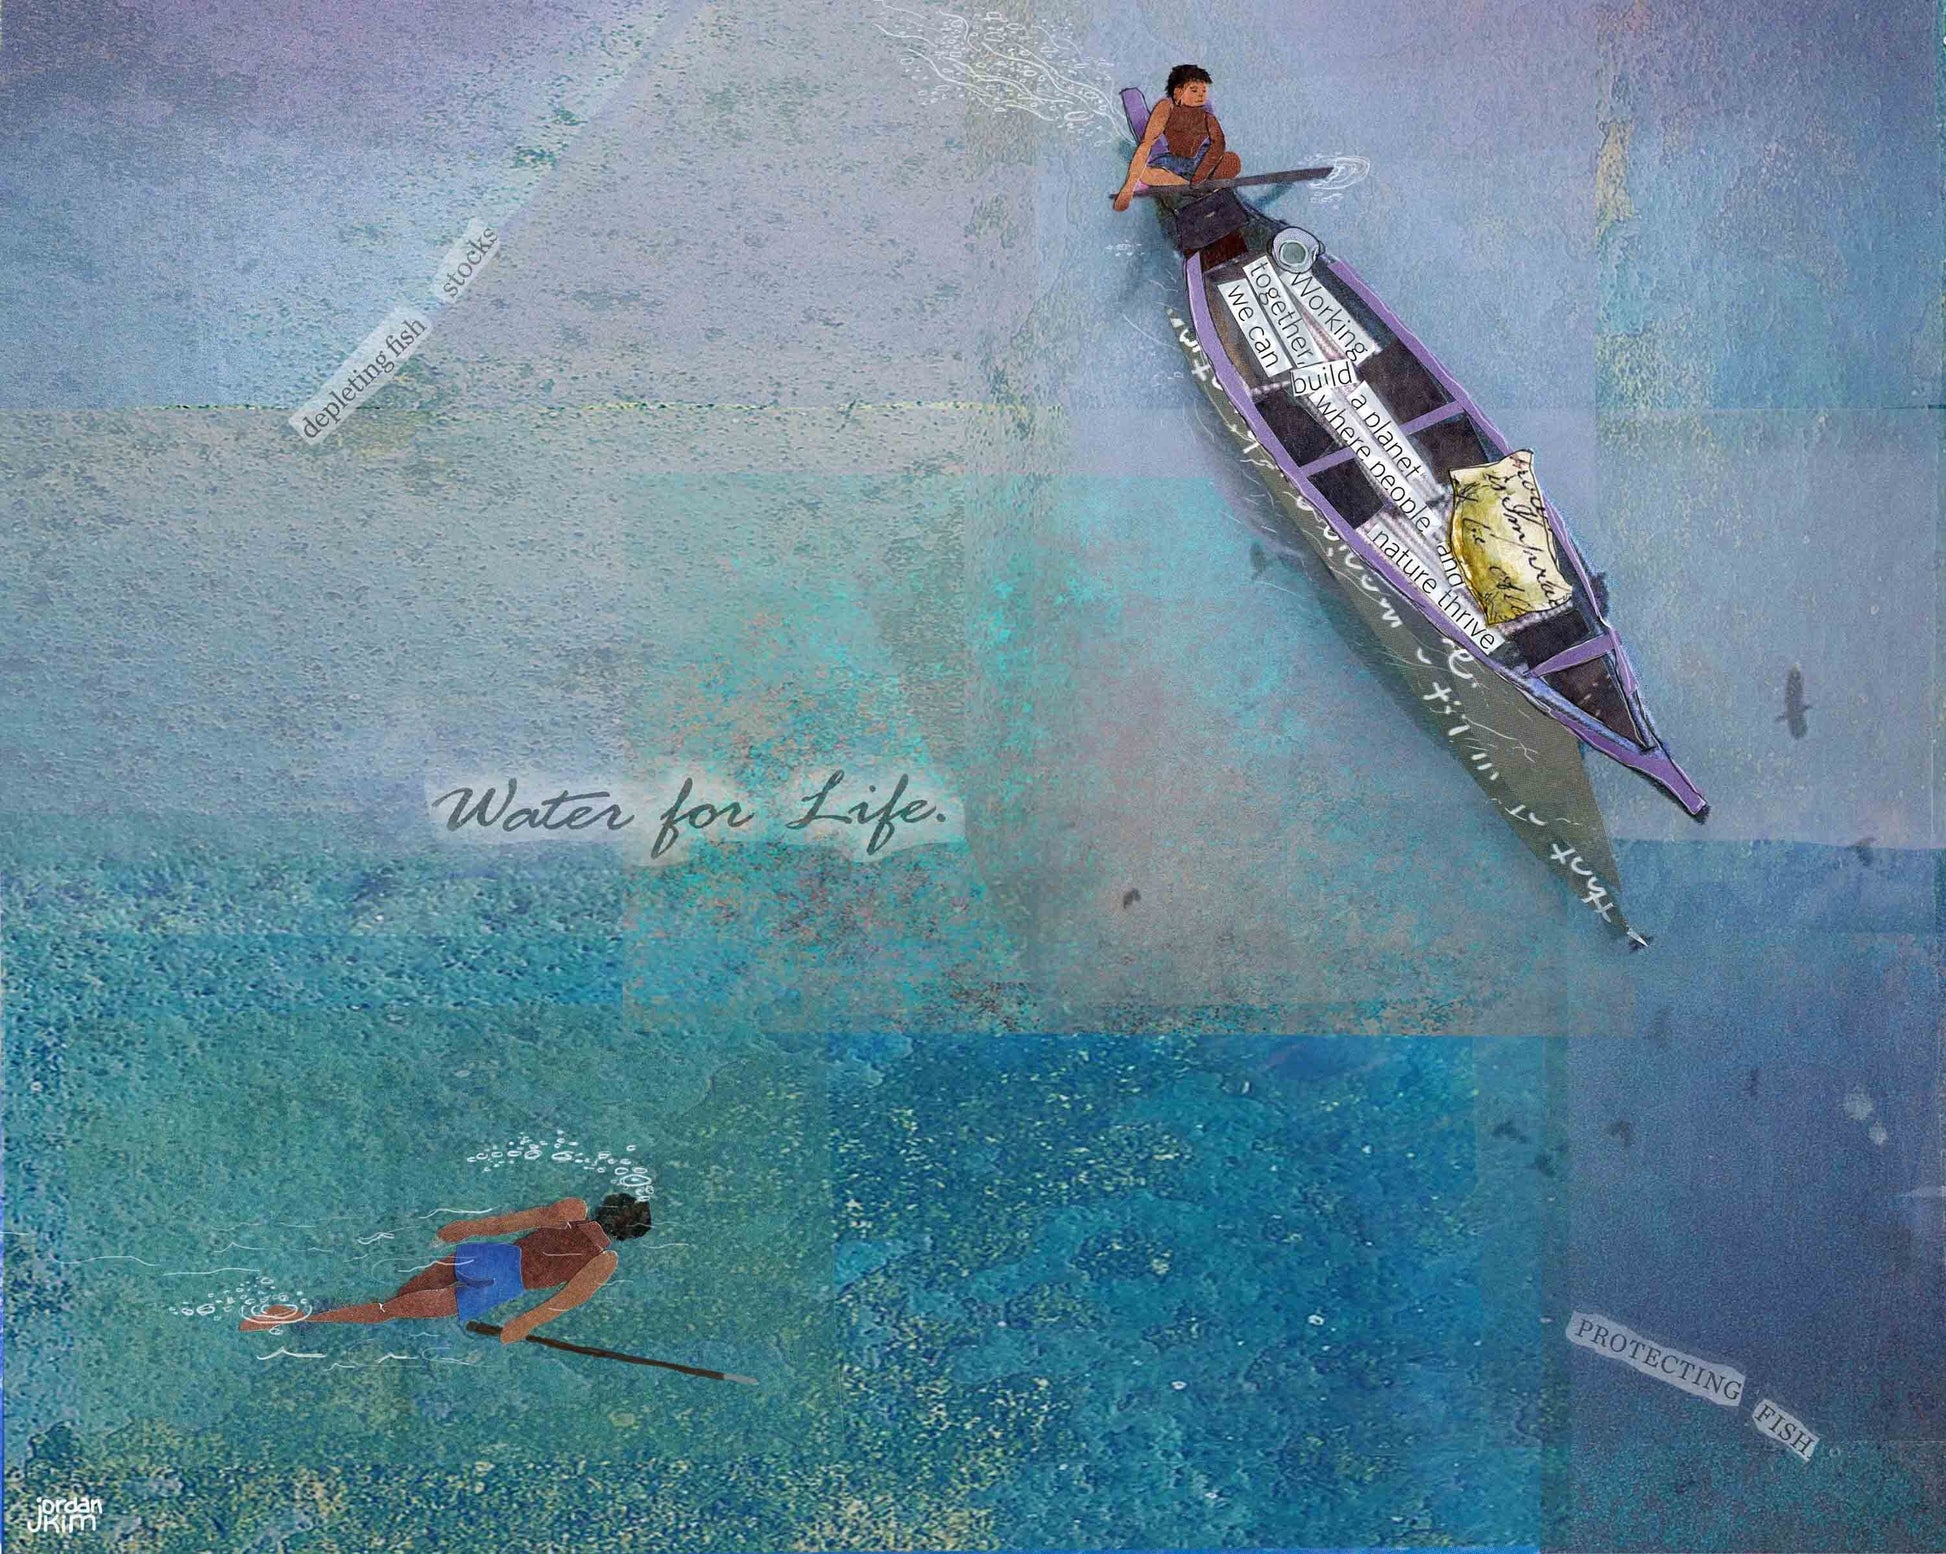 8x10 Art Print of a Person in a Fishing Boat and someone Spear Fishing - Inspiration - Ocean - Fishing - Water